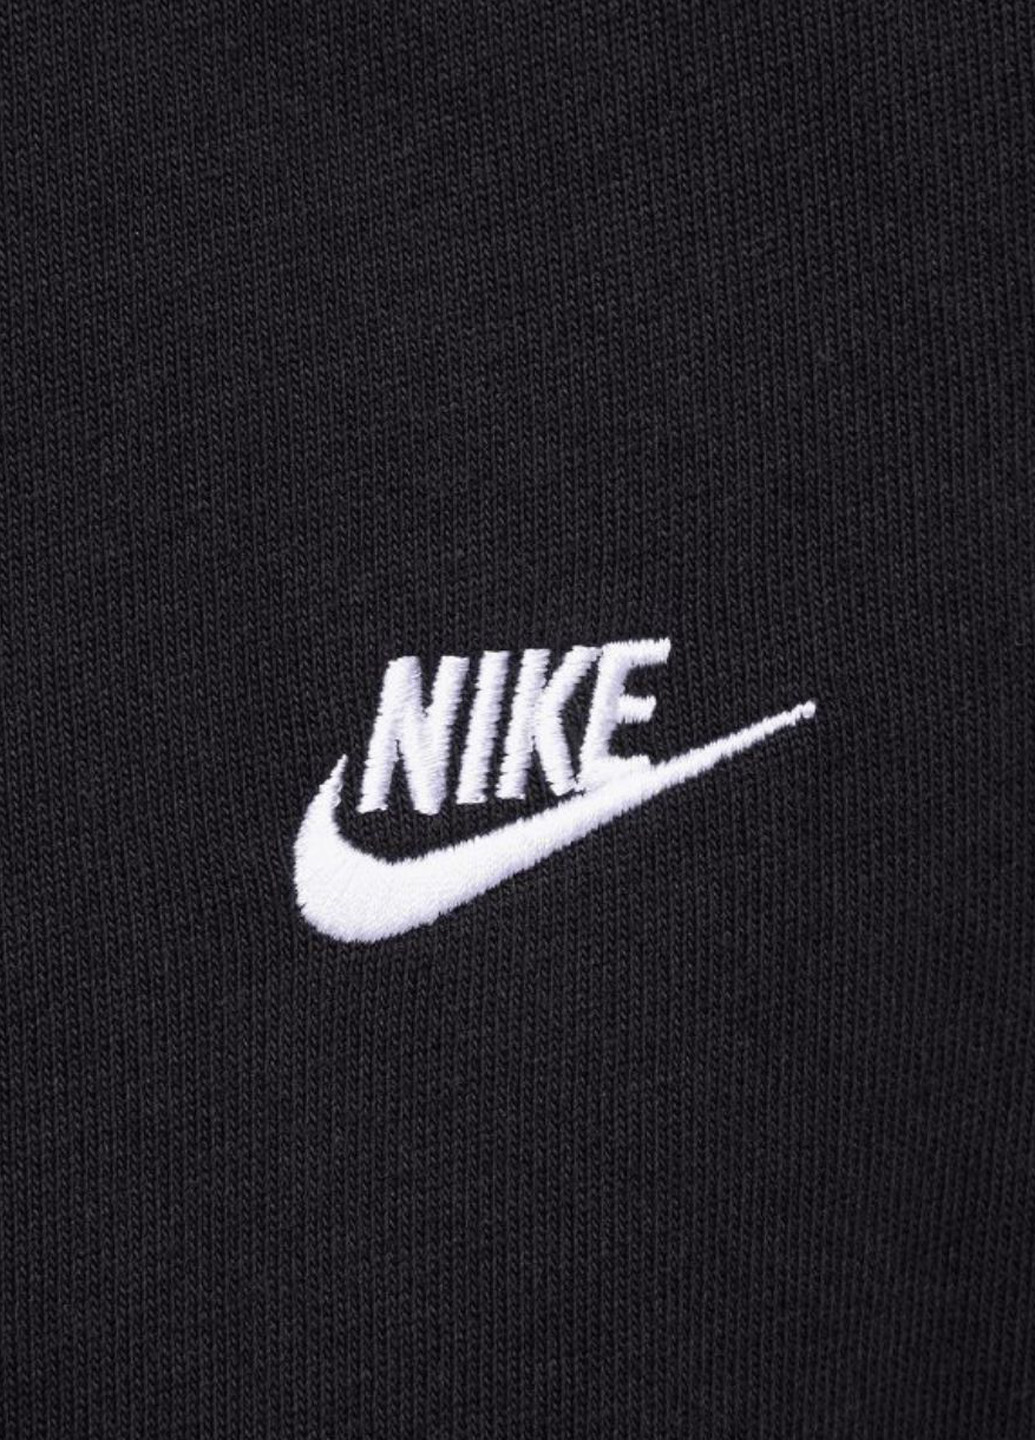 Штани FQ4332-010_2024 Nike m nk club knit oh pant (289349664)